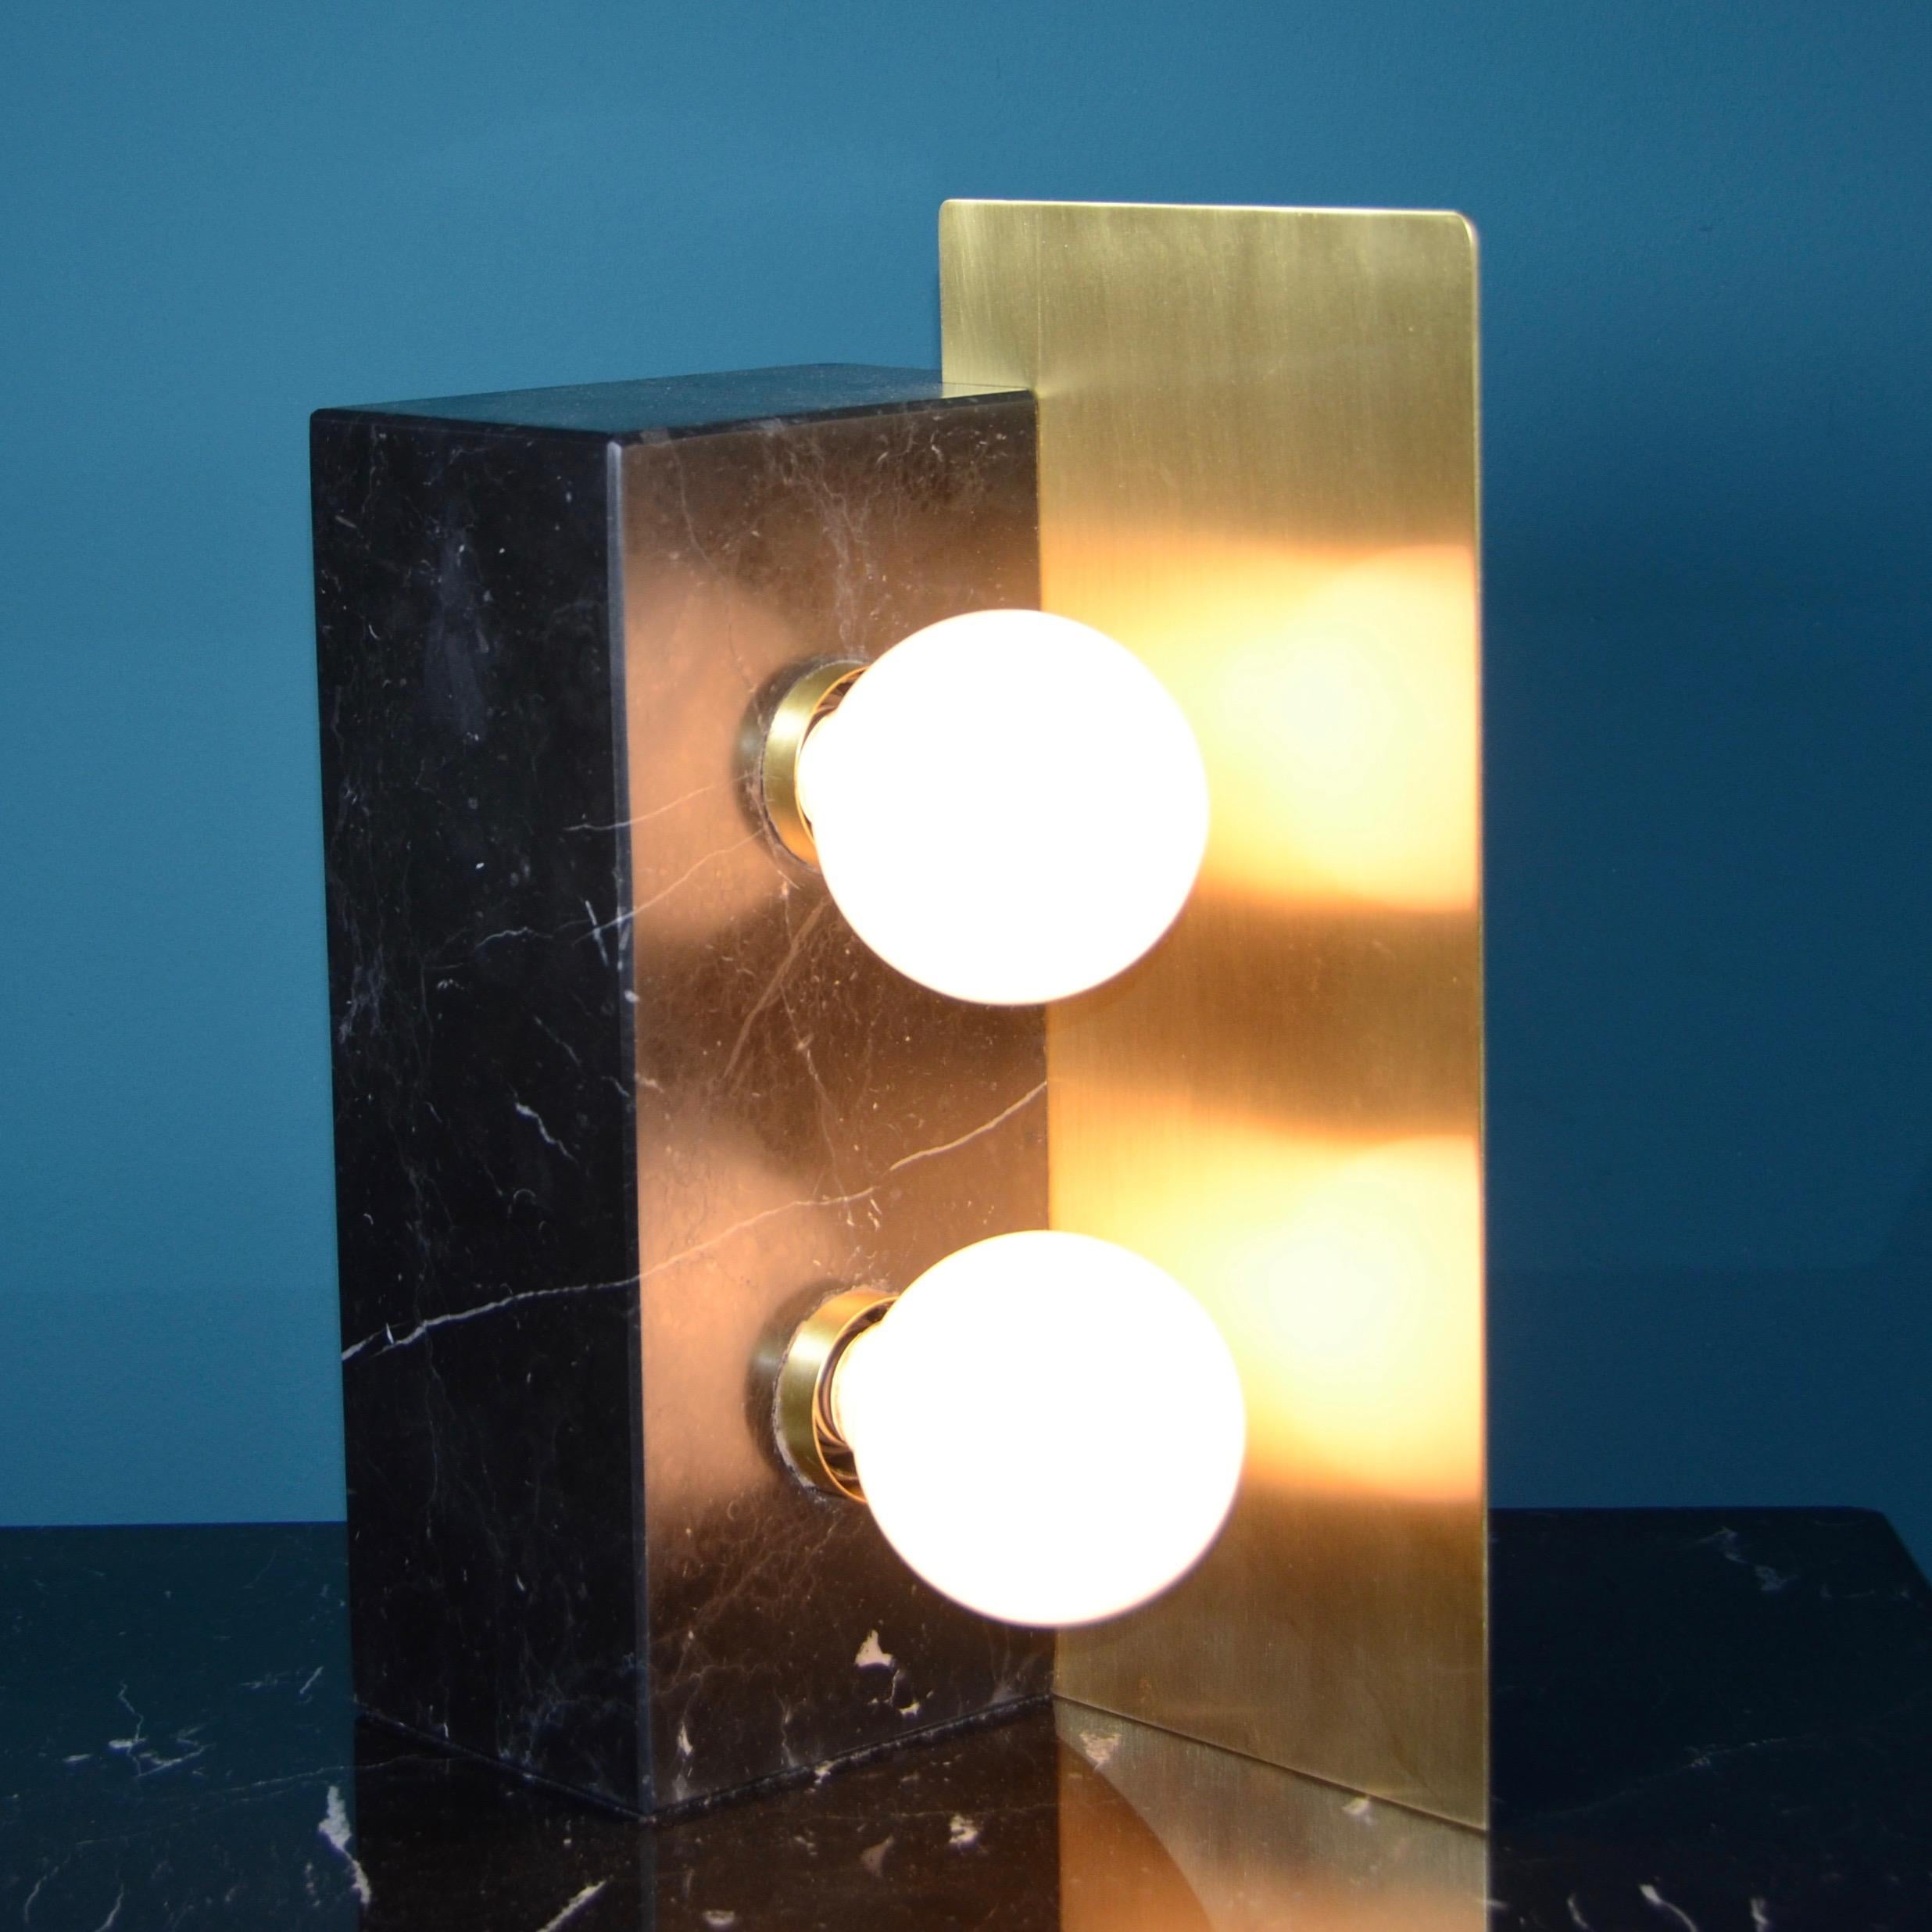 Monolithic table lamp in satin nero Marquinha marble and satin brass with a vintage look.